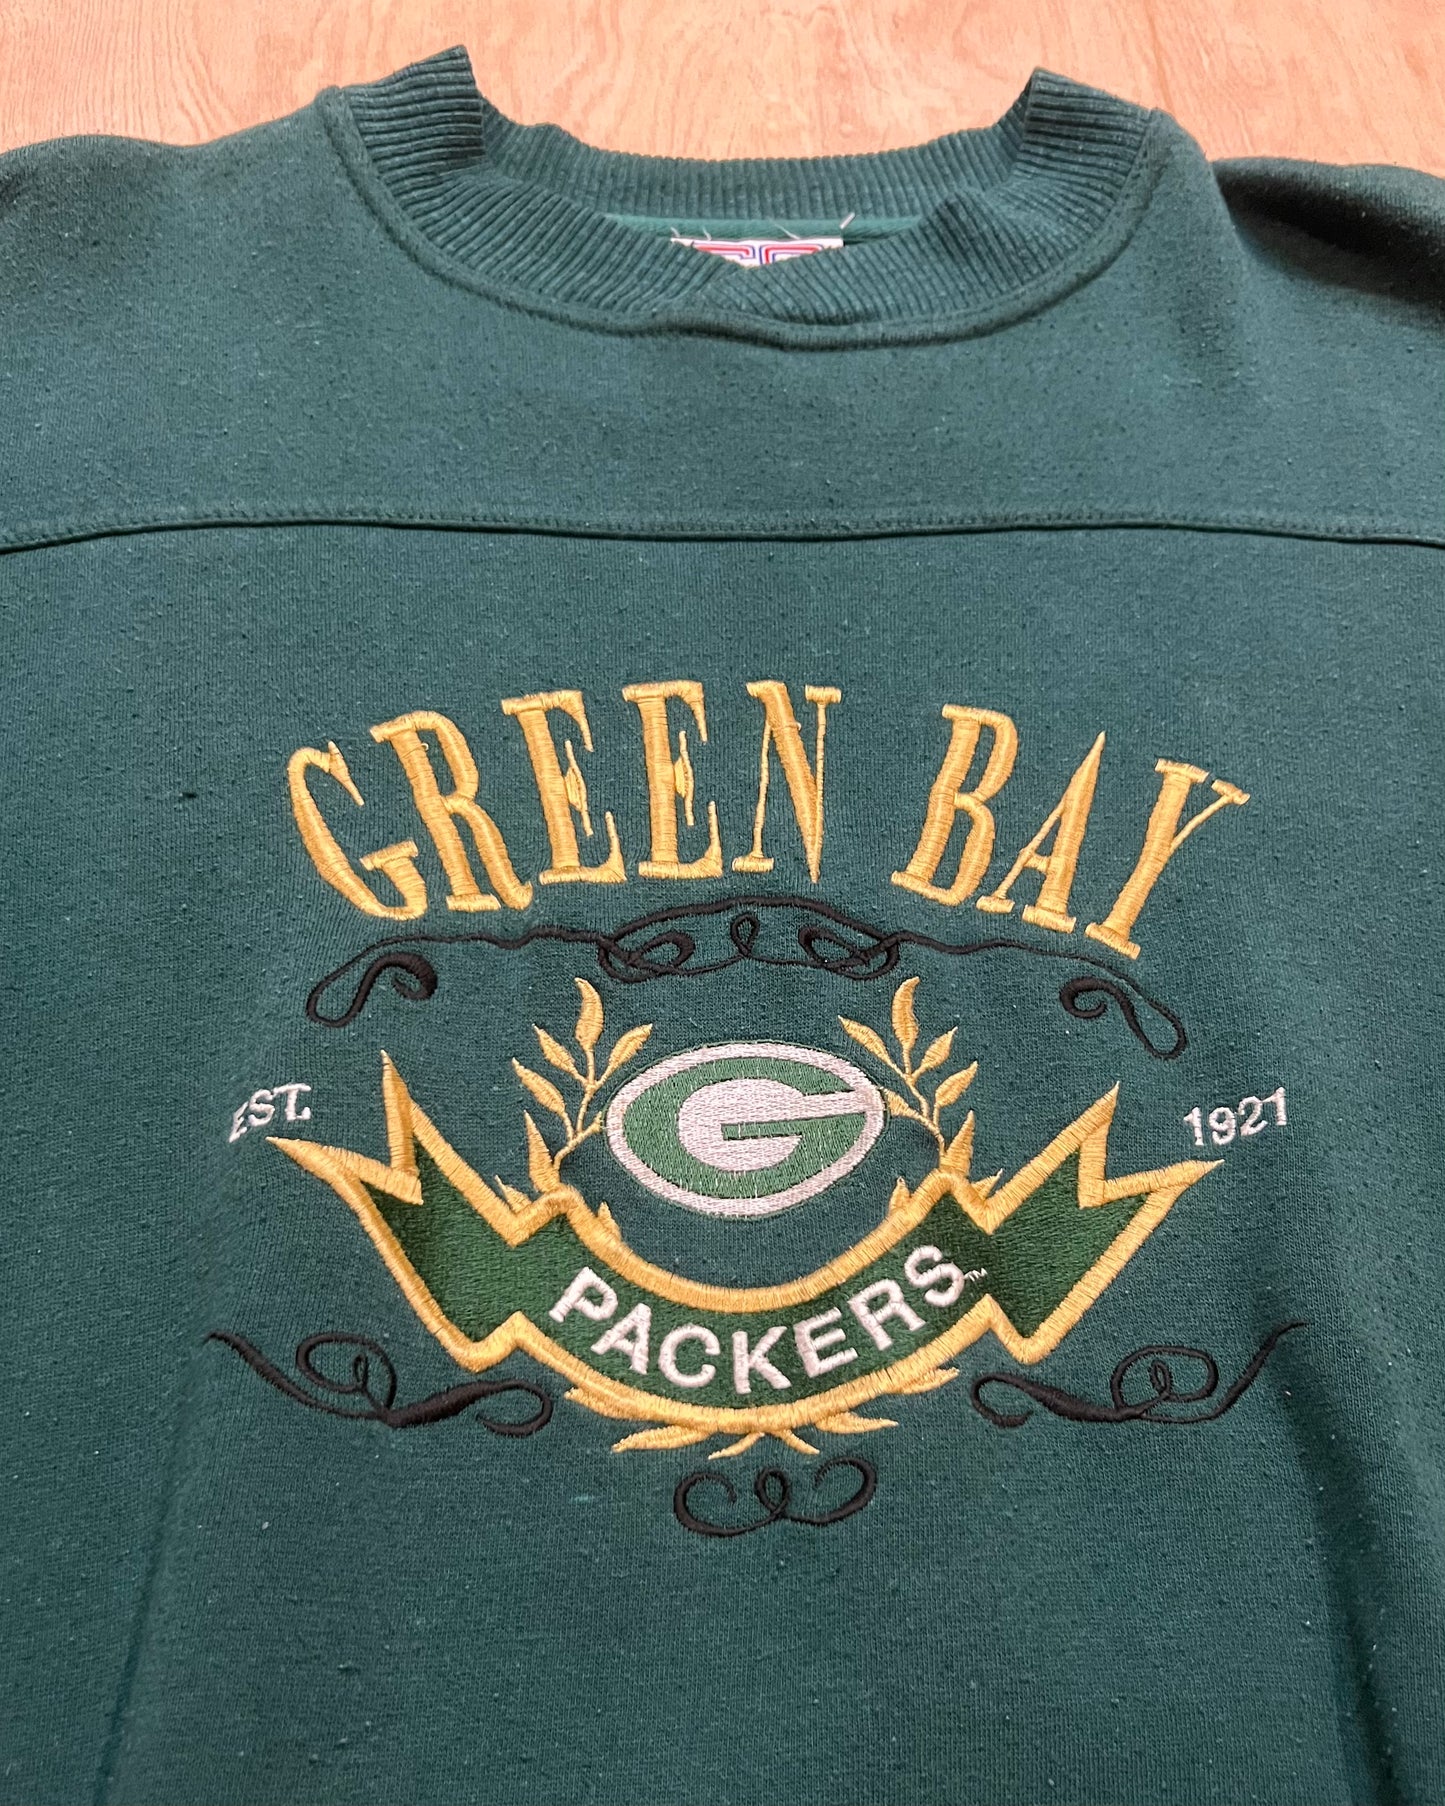 Vintage Green Bay Packers Embroidered Cradle Sports Crewneck